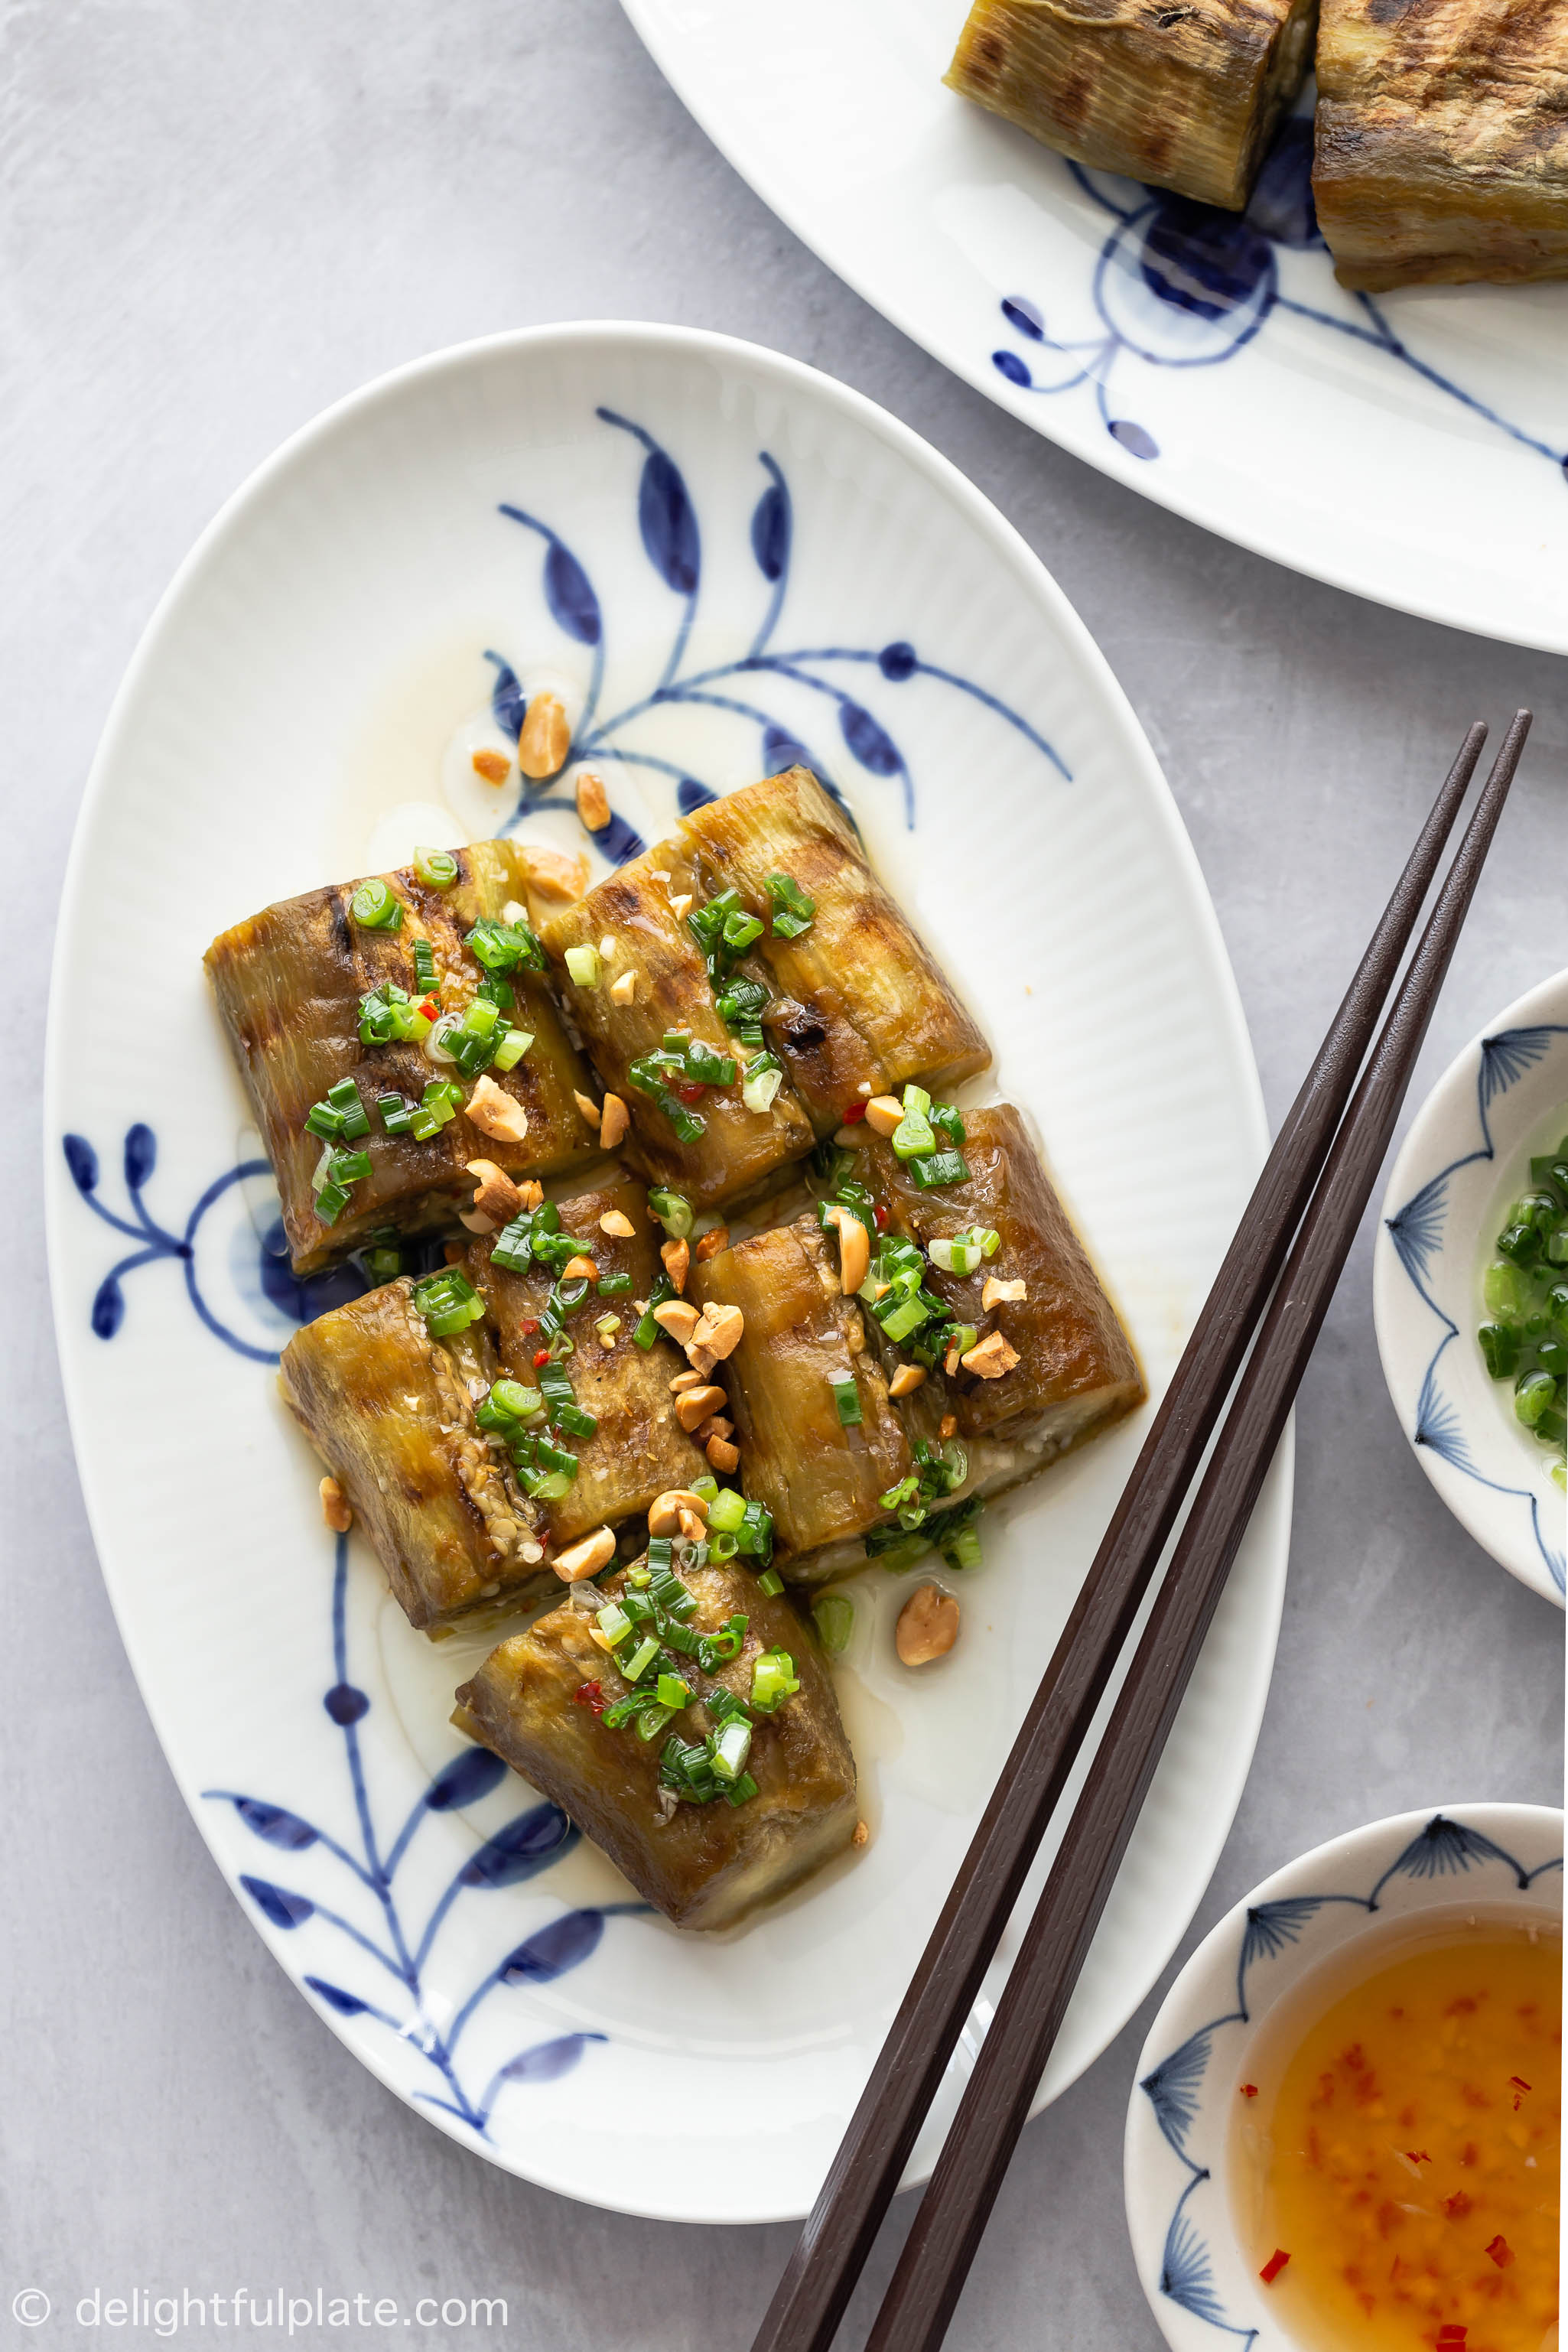 Vietnamese Grilled Eggplant with Scallion Oil (Ca Tim Nuong Mo Hanh) features whole eggplants grilled until charred and served with fragrant scallion oil, fish sauce dressing and roasted peanuts.